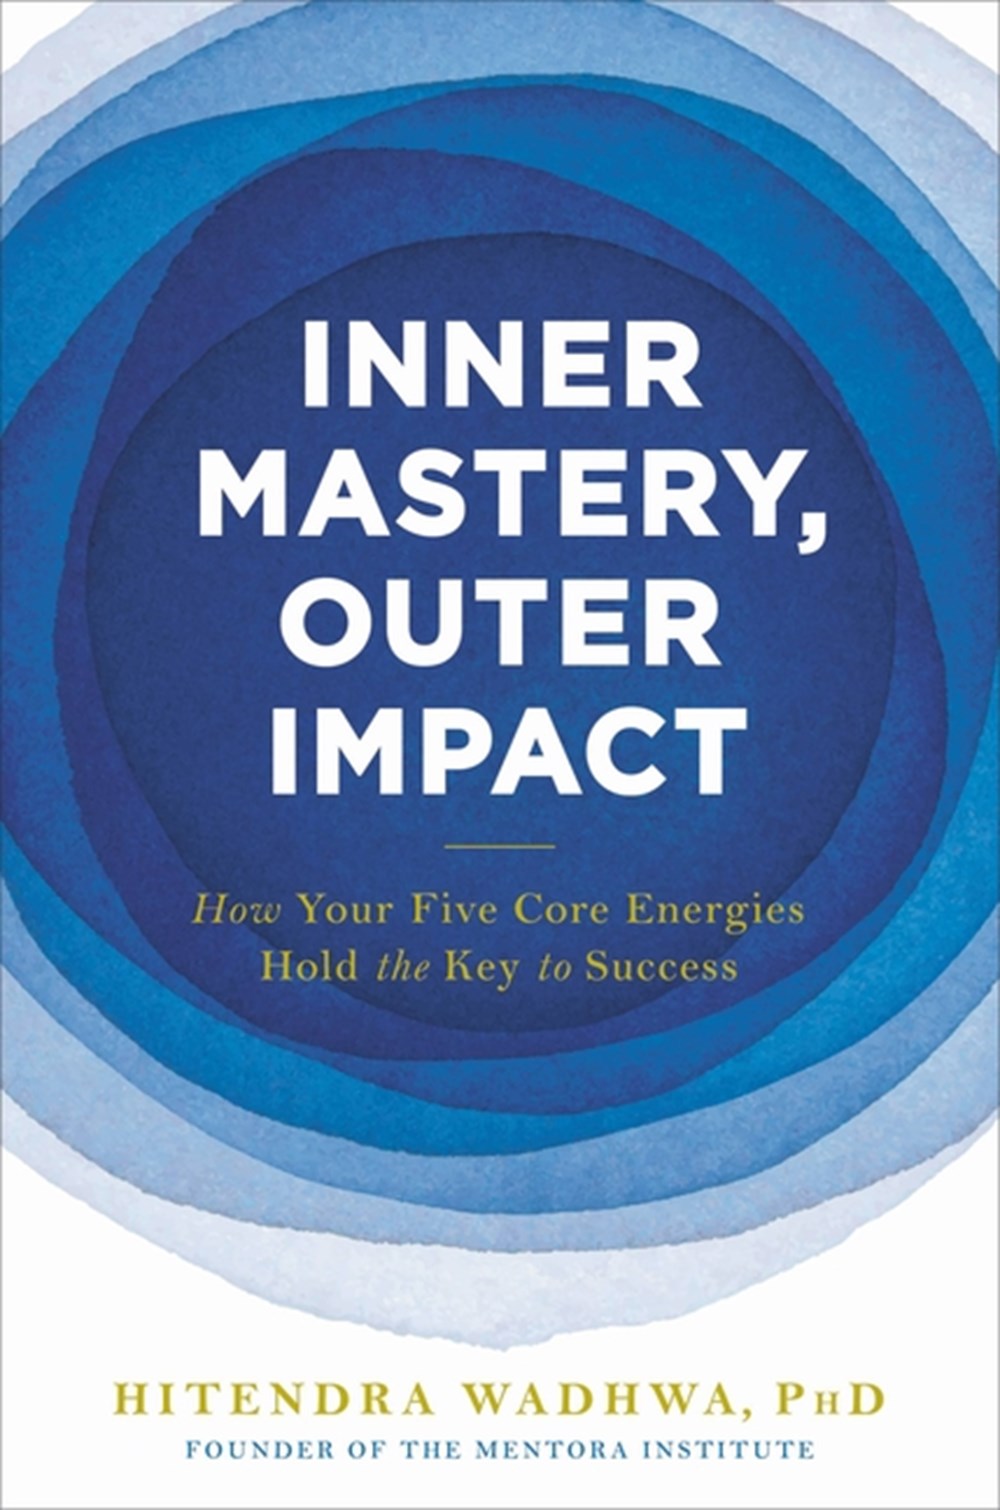 Inner Mastery, Outer Impact How Your Five Core Energies Hold the Key to Success